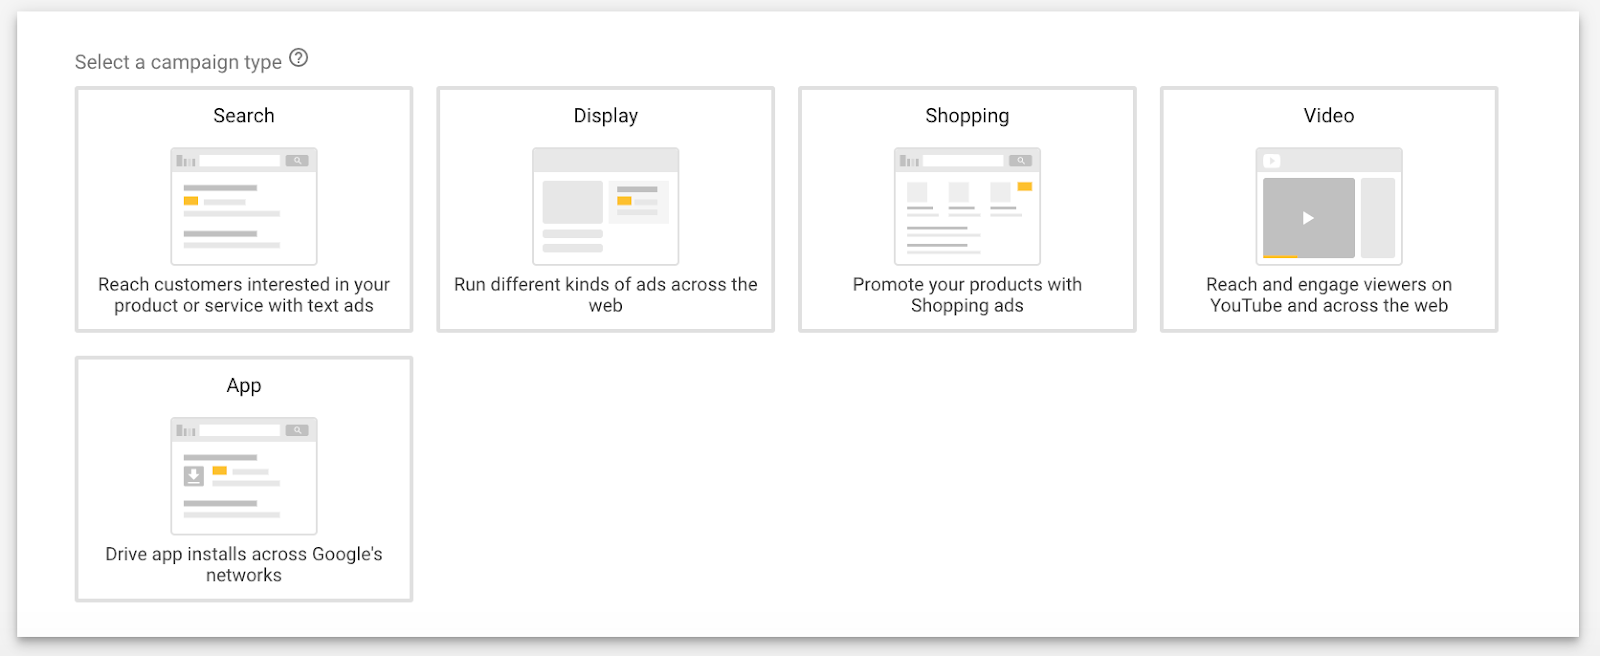 Google Ads - Campaign Types